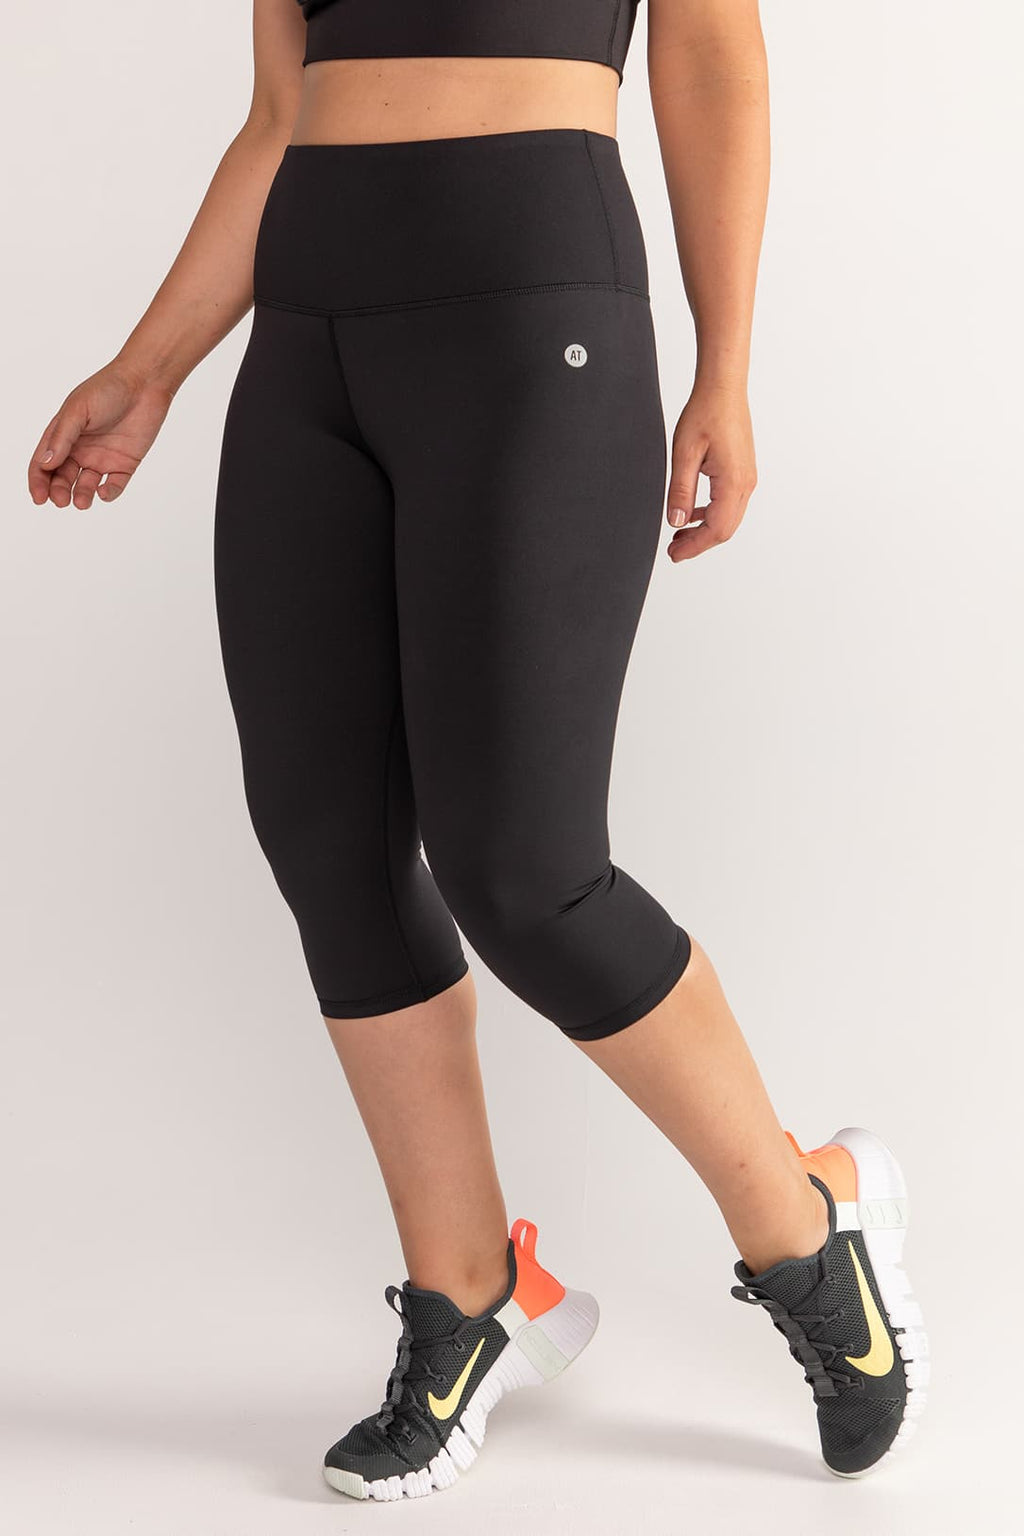 Essential 3/4 Length Tight - Black from Active Truth™
